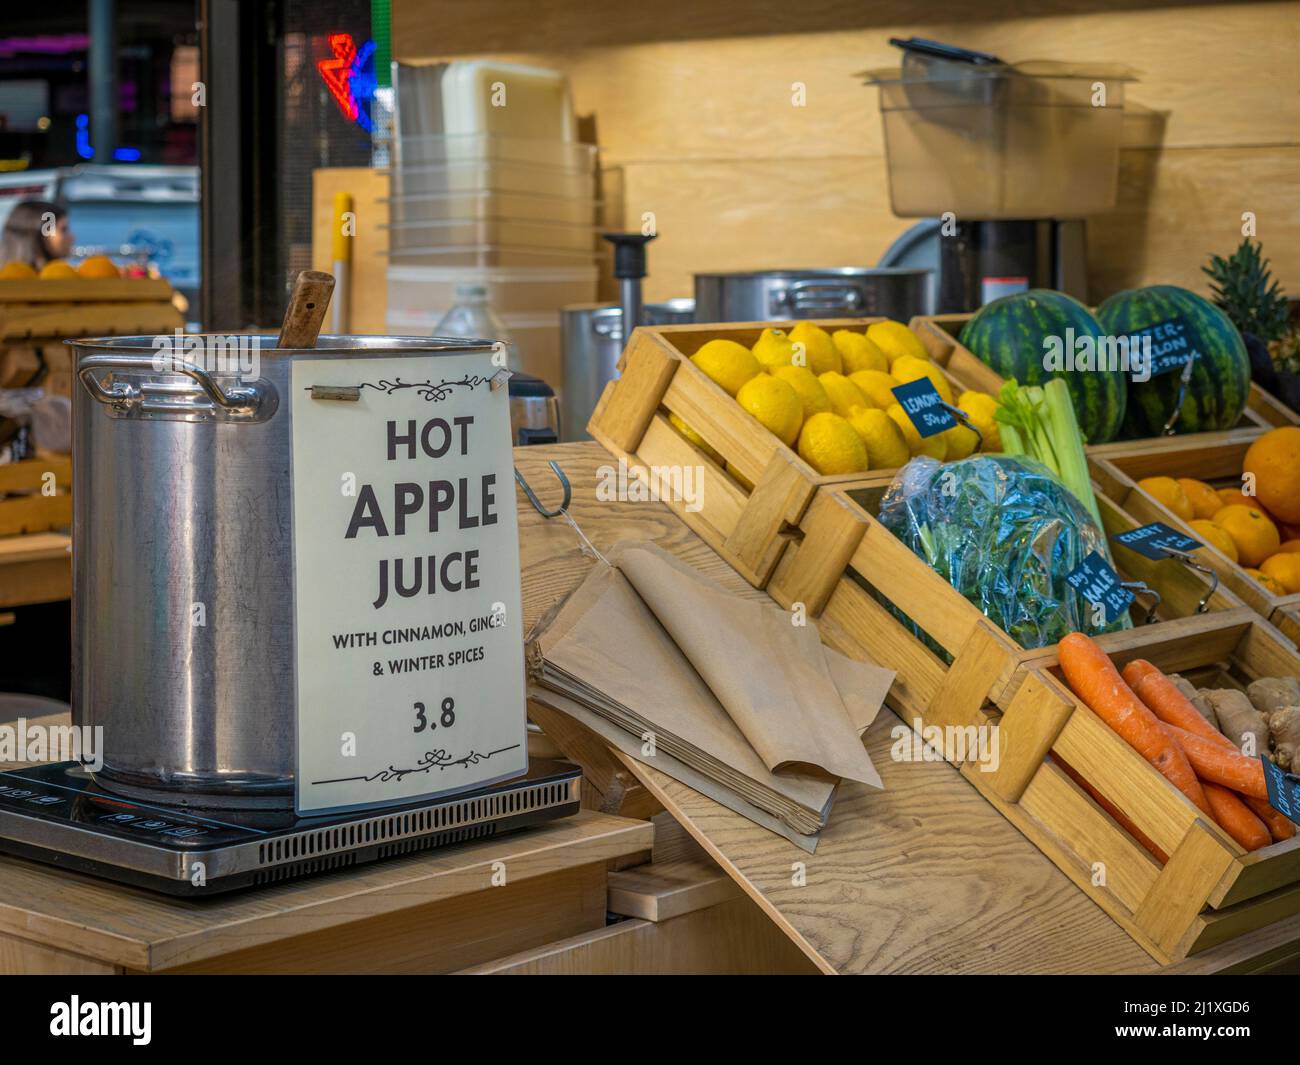 Large pan of hot apple juice for sale on a fruit and vegetable stall in Spitalfields market. London. Stock Photo